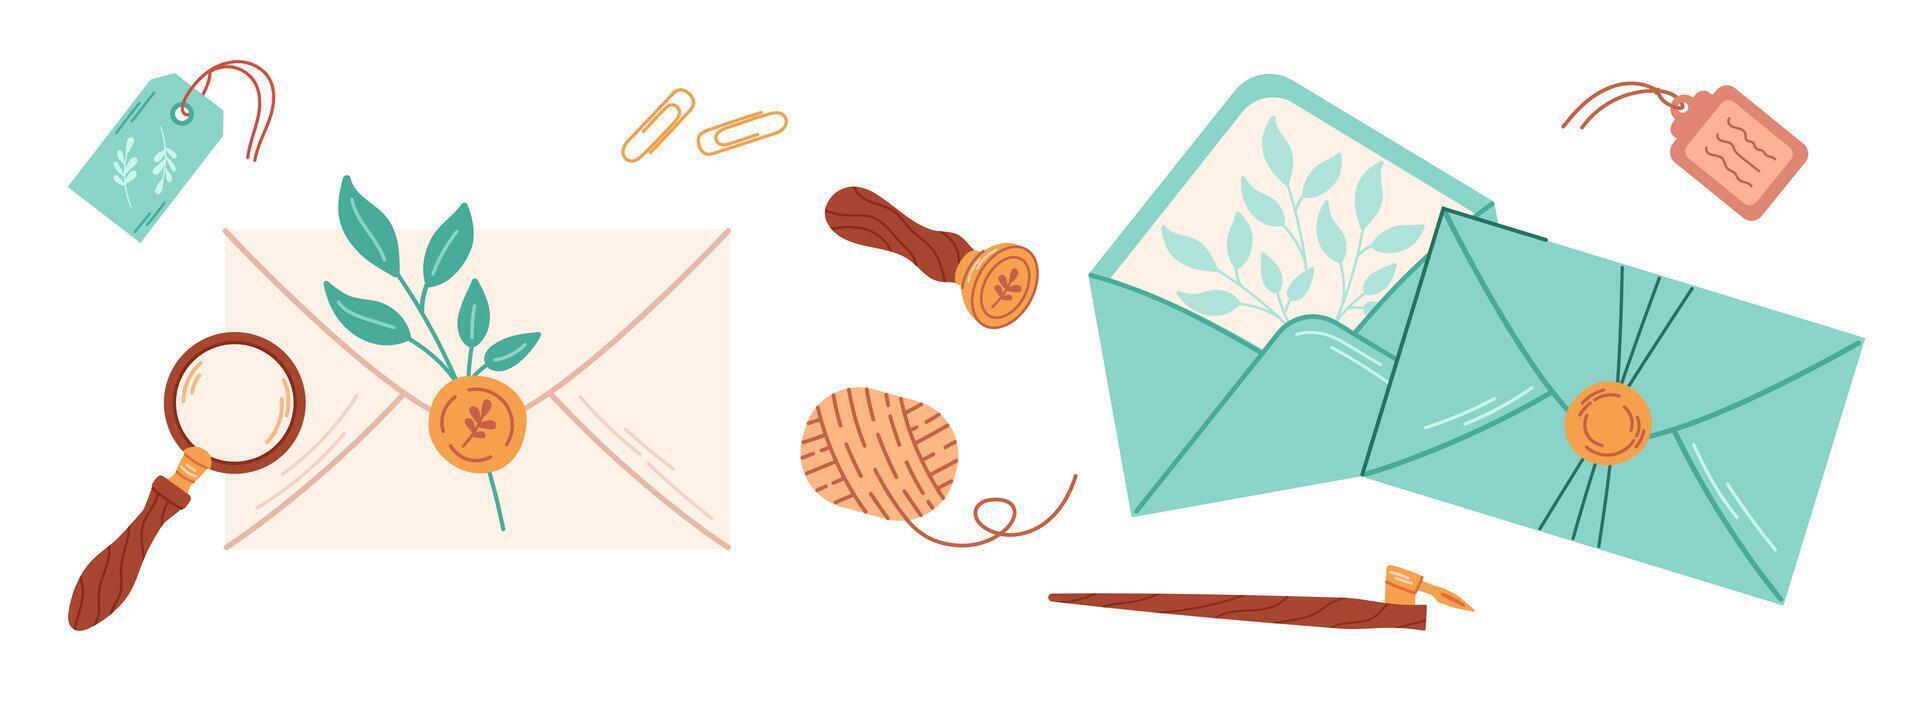 Craft paper envelopes sealed or opened. The envelopes are sealed with wax. Handmade, hobby. Postal stationery. vector